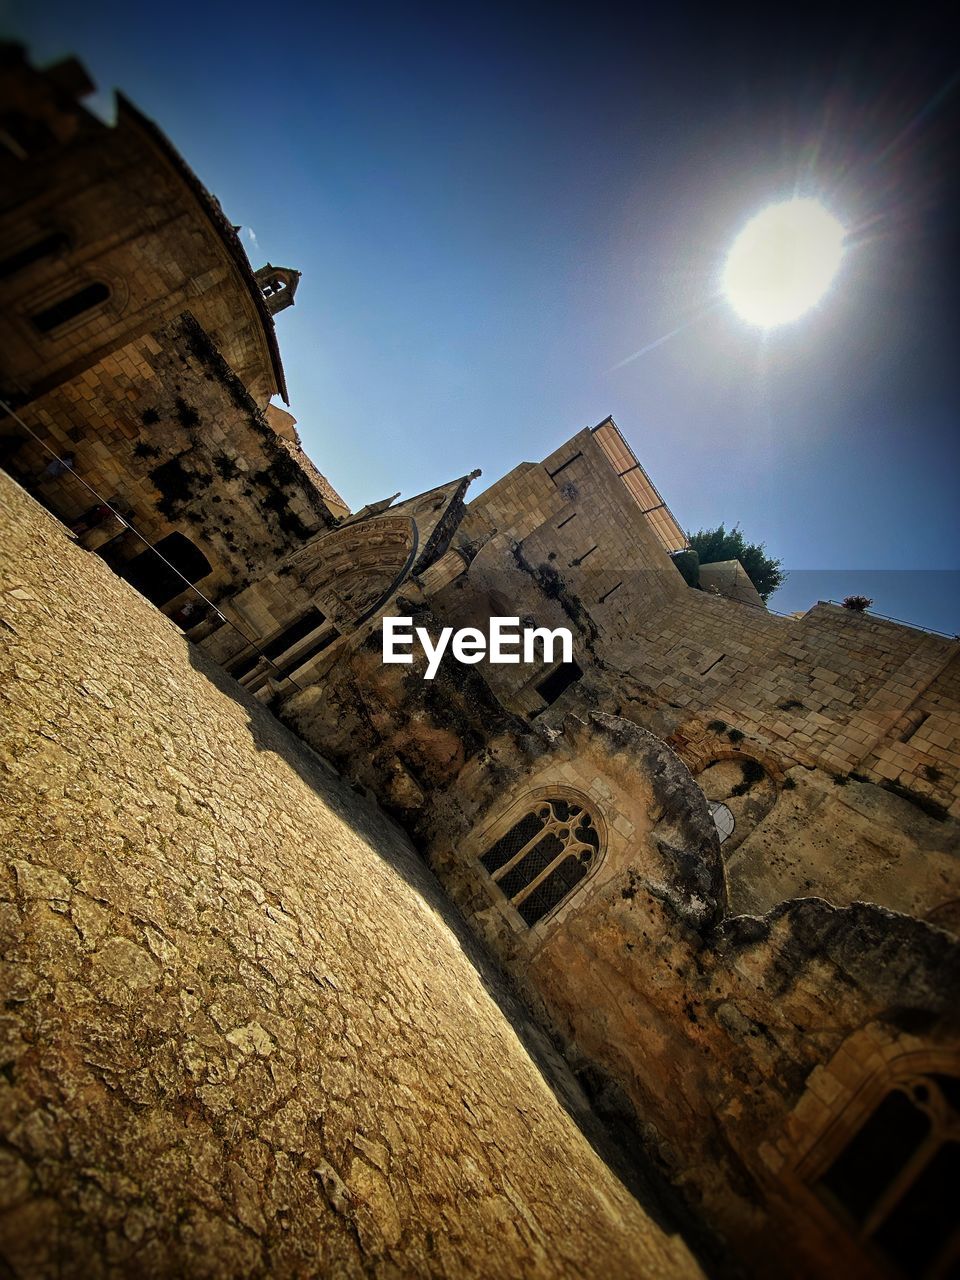 architecture, sky, history, night, the past, light, built structure, darkness, nature, building exterior, rock, low angle view, no people, temple, travel destinations, ancient, moon, building, old ruin, outdoors, reflection, travel, wall, fort, old, clear sky, ancient history, stone material